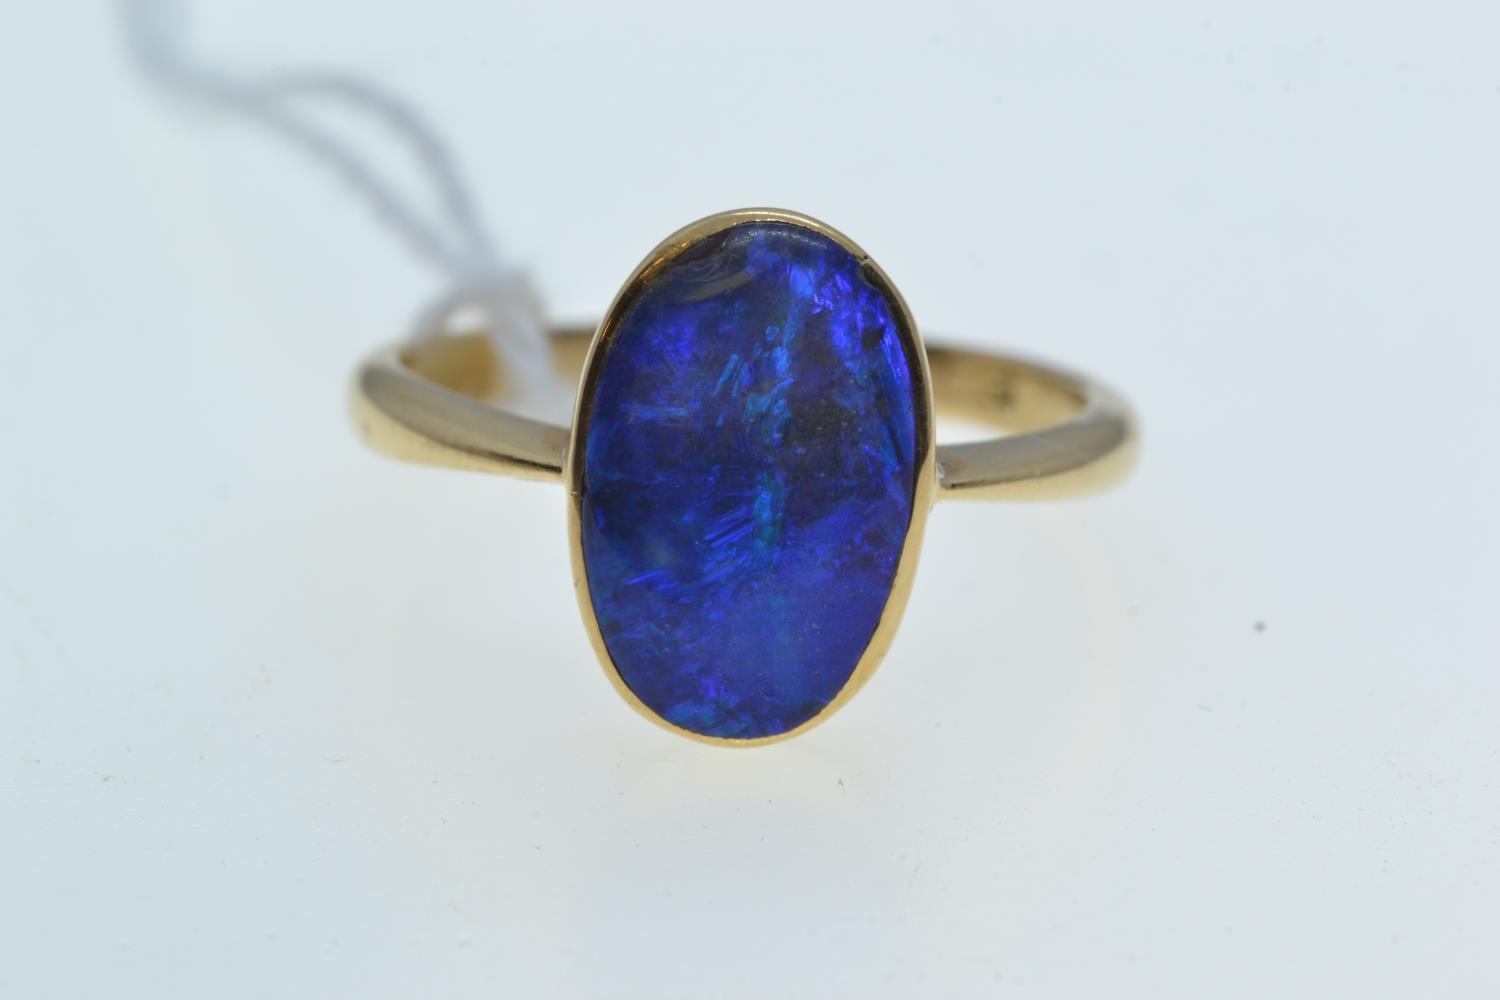 Gold & black opal doublet ring, gold mark rubbed but tests positive for 18ct gold, size Q, 3.73 gram